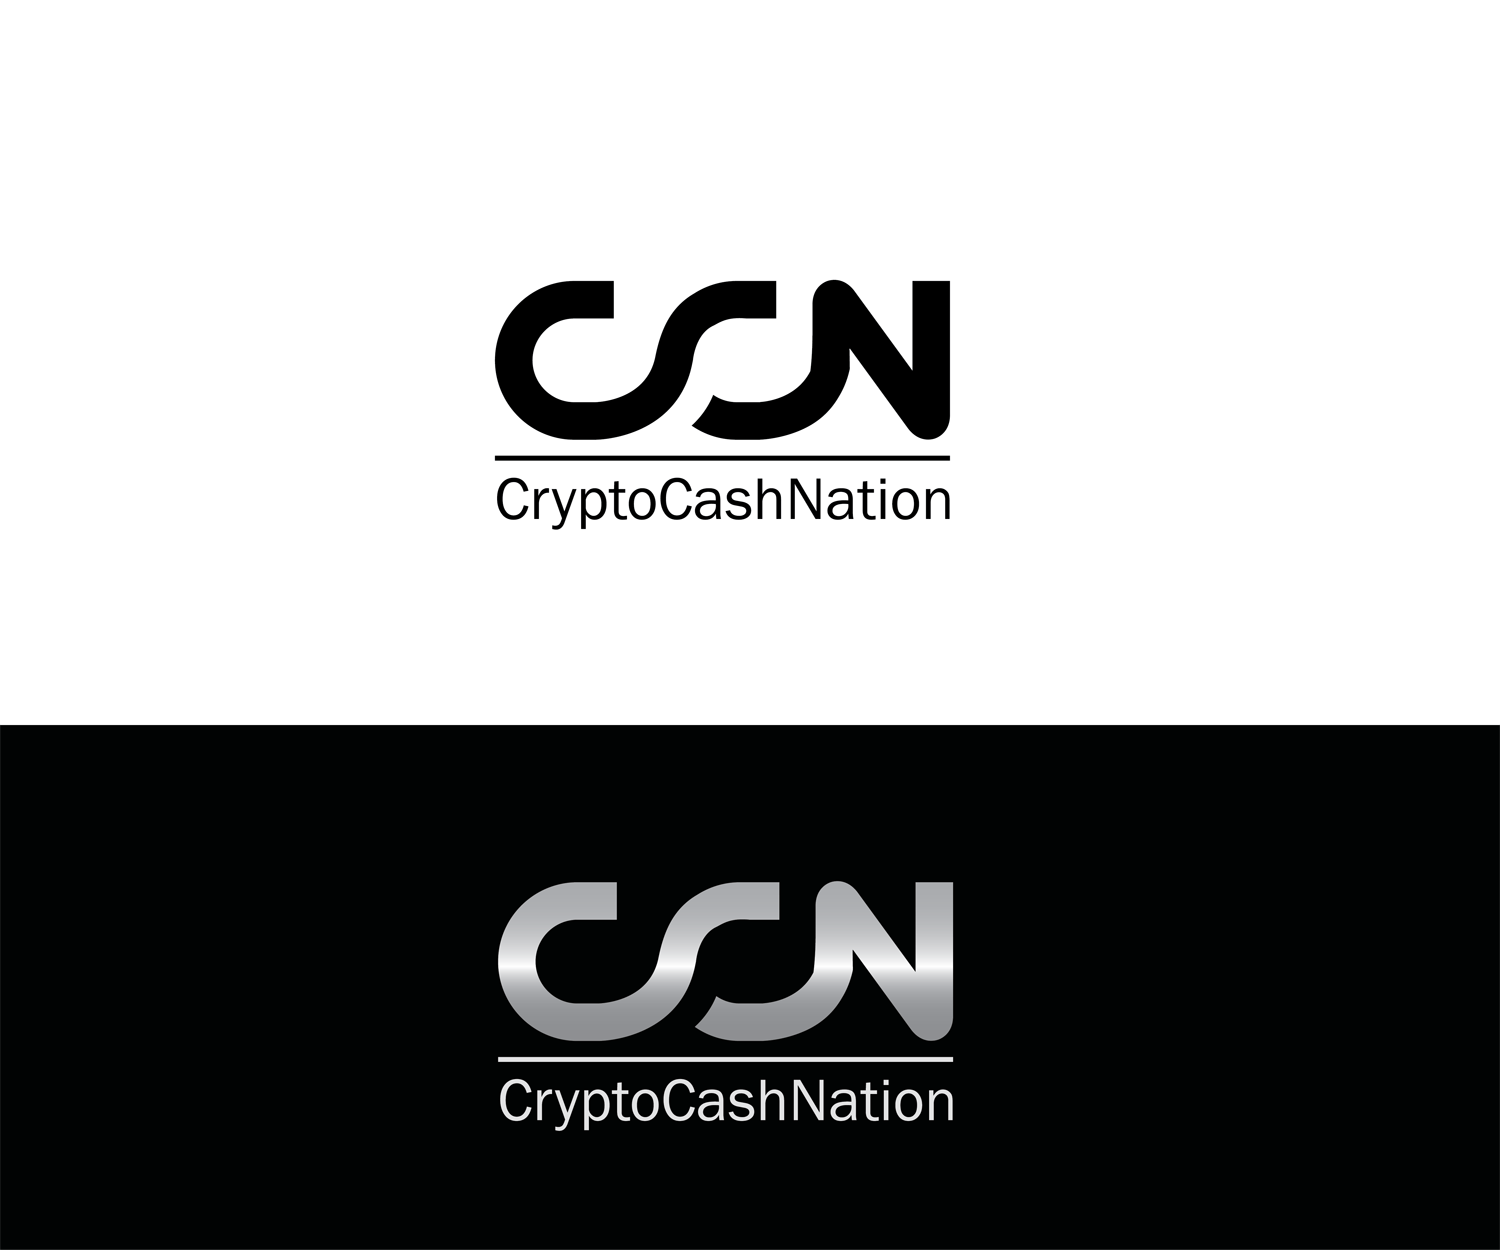 CCN Logo - Modern, Serious, Education Logo Design for CryptoCashNation by Moat ...